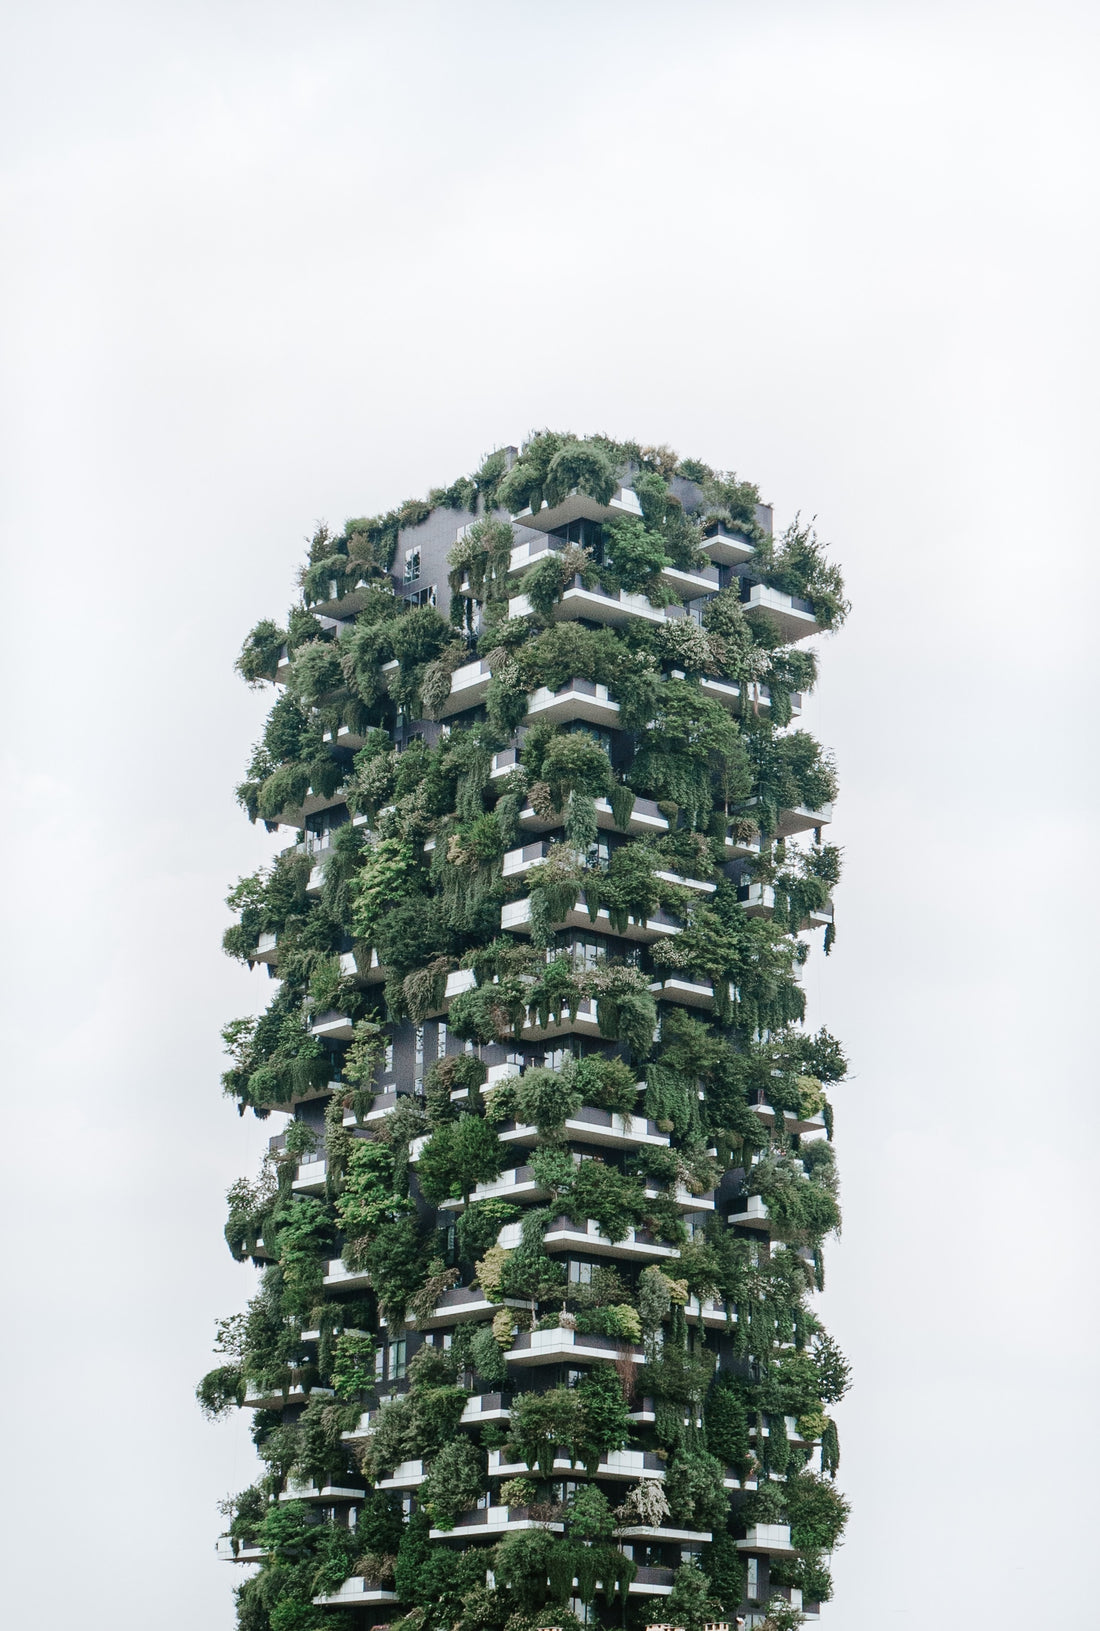 tall building with green balconies and vegetation